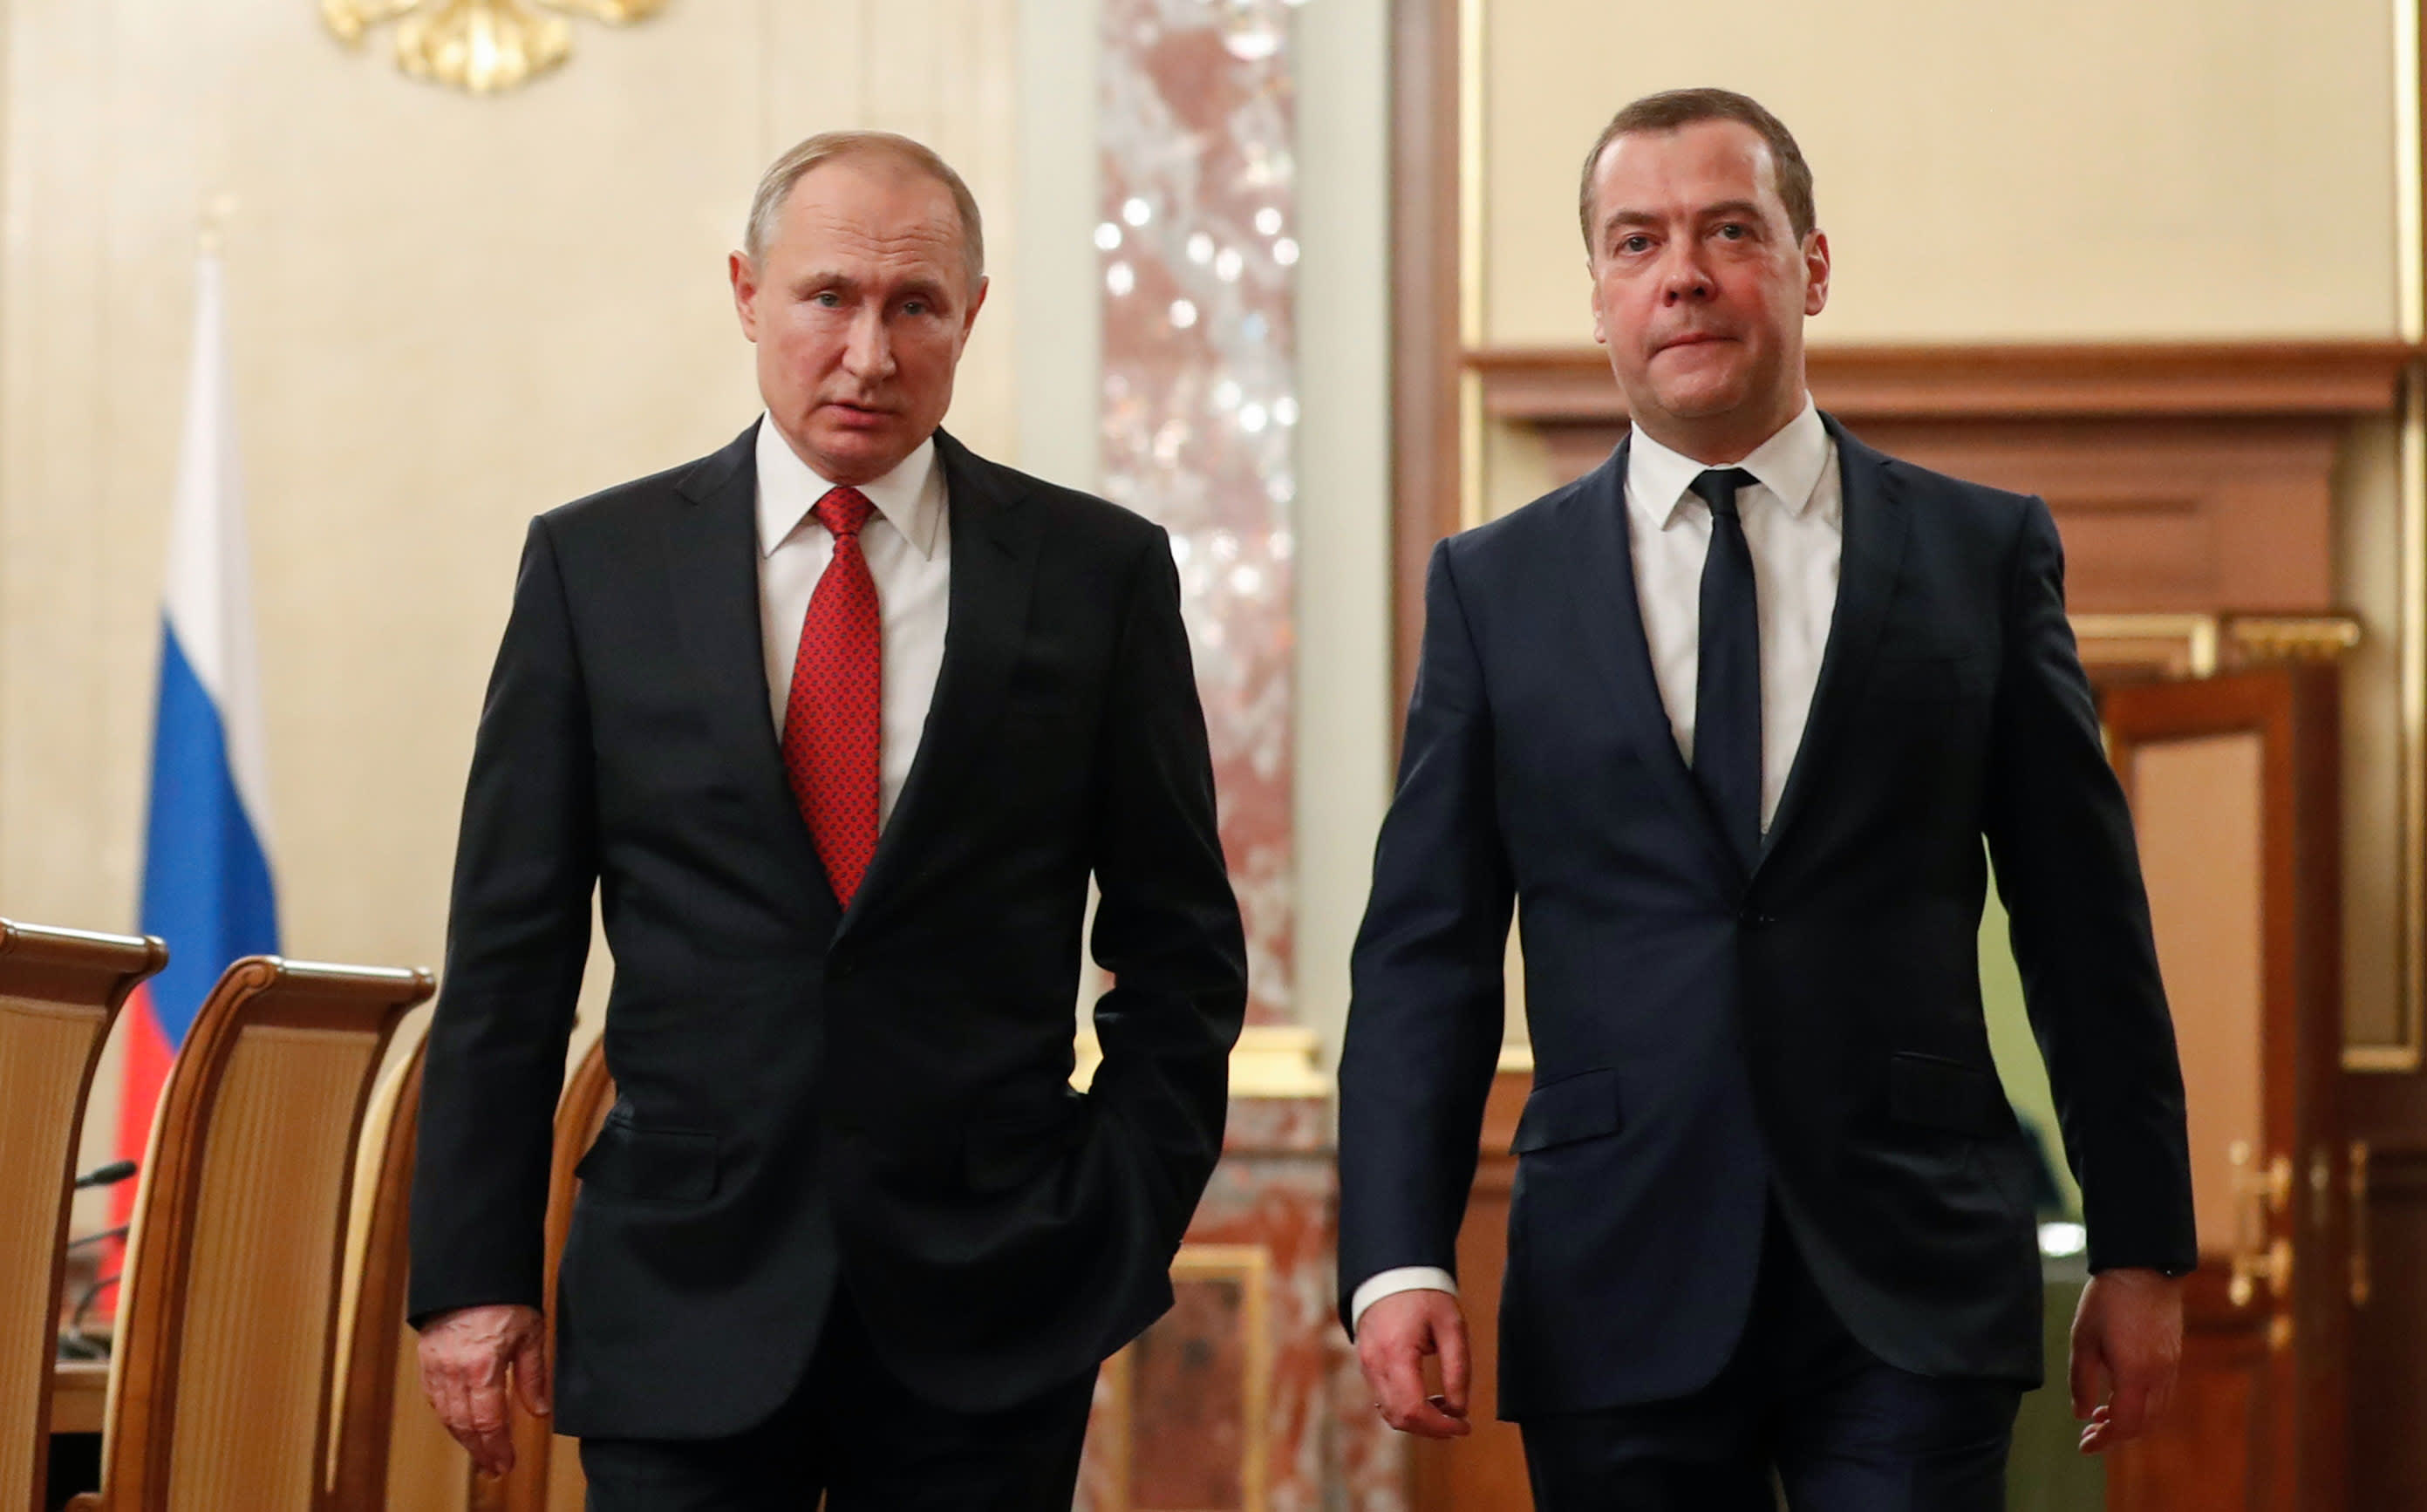 Putin's call for 'reform' of Russia govt leads to Medvedev resignation